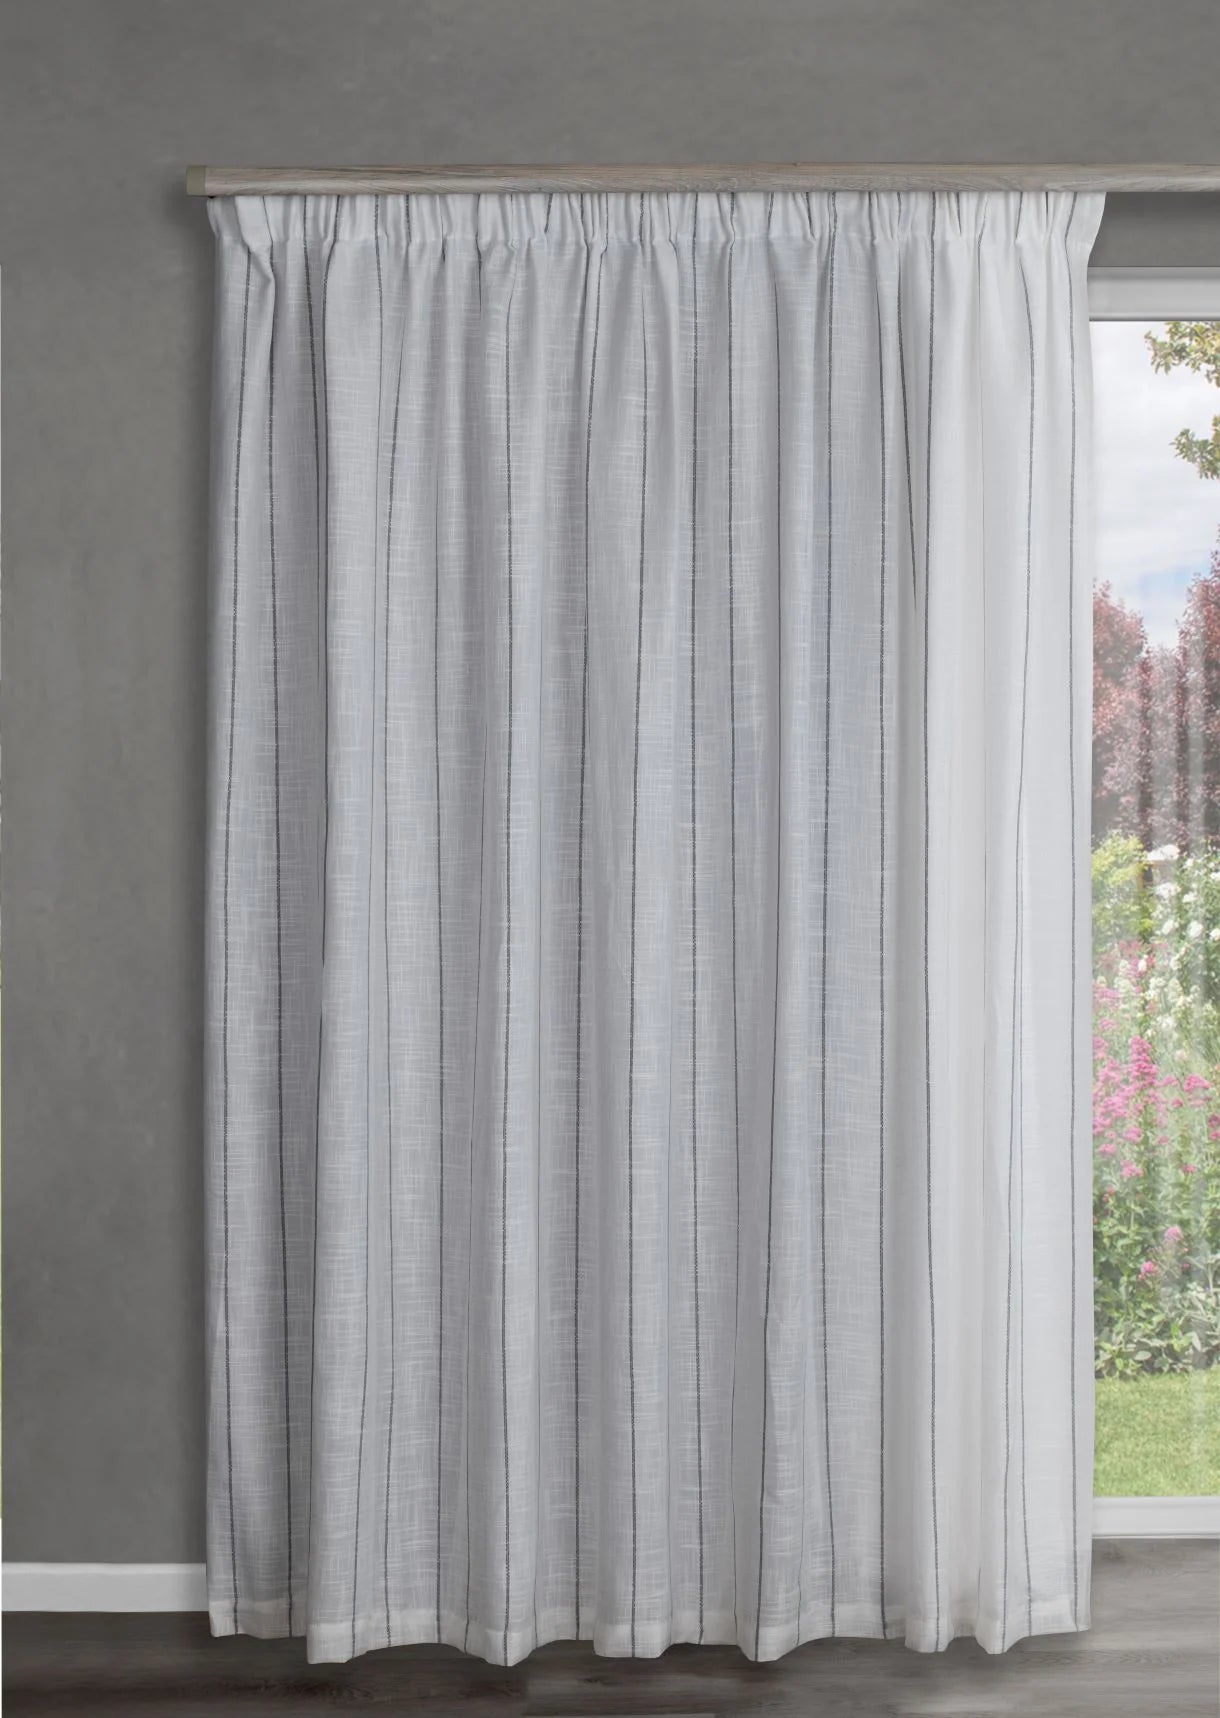 Riptide Taped Curtain